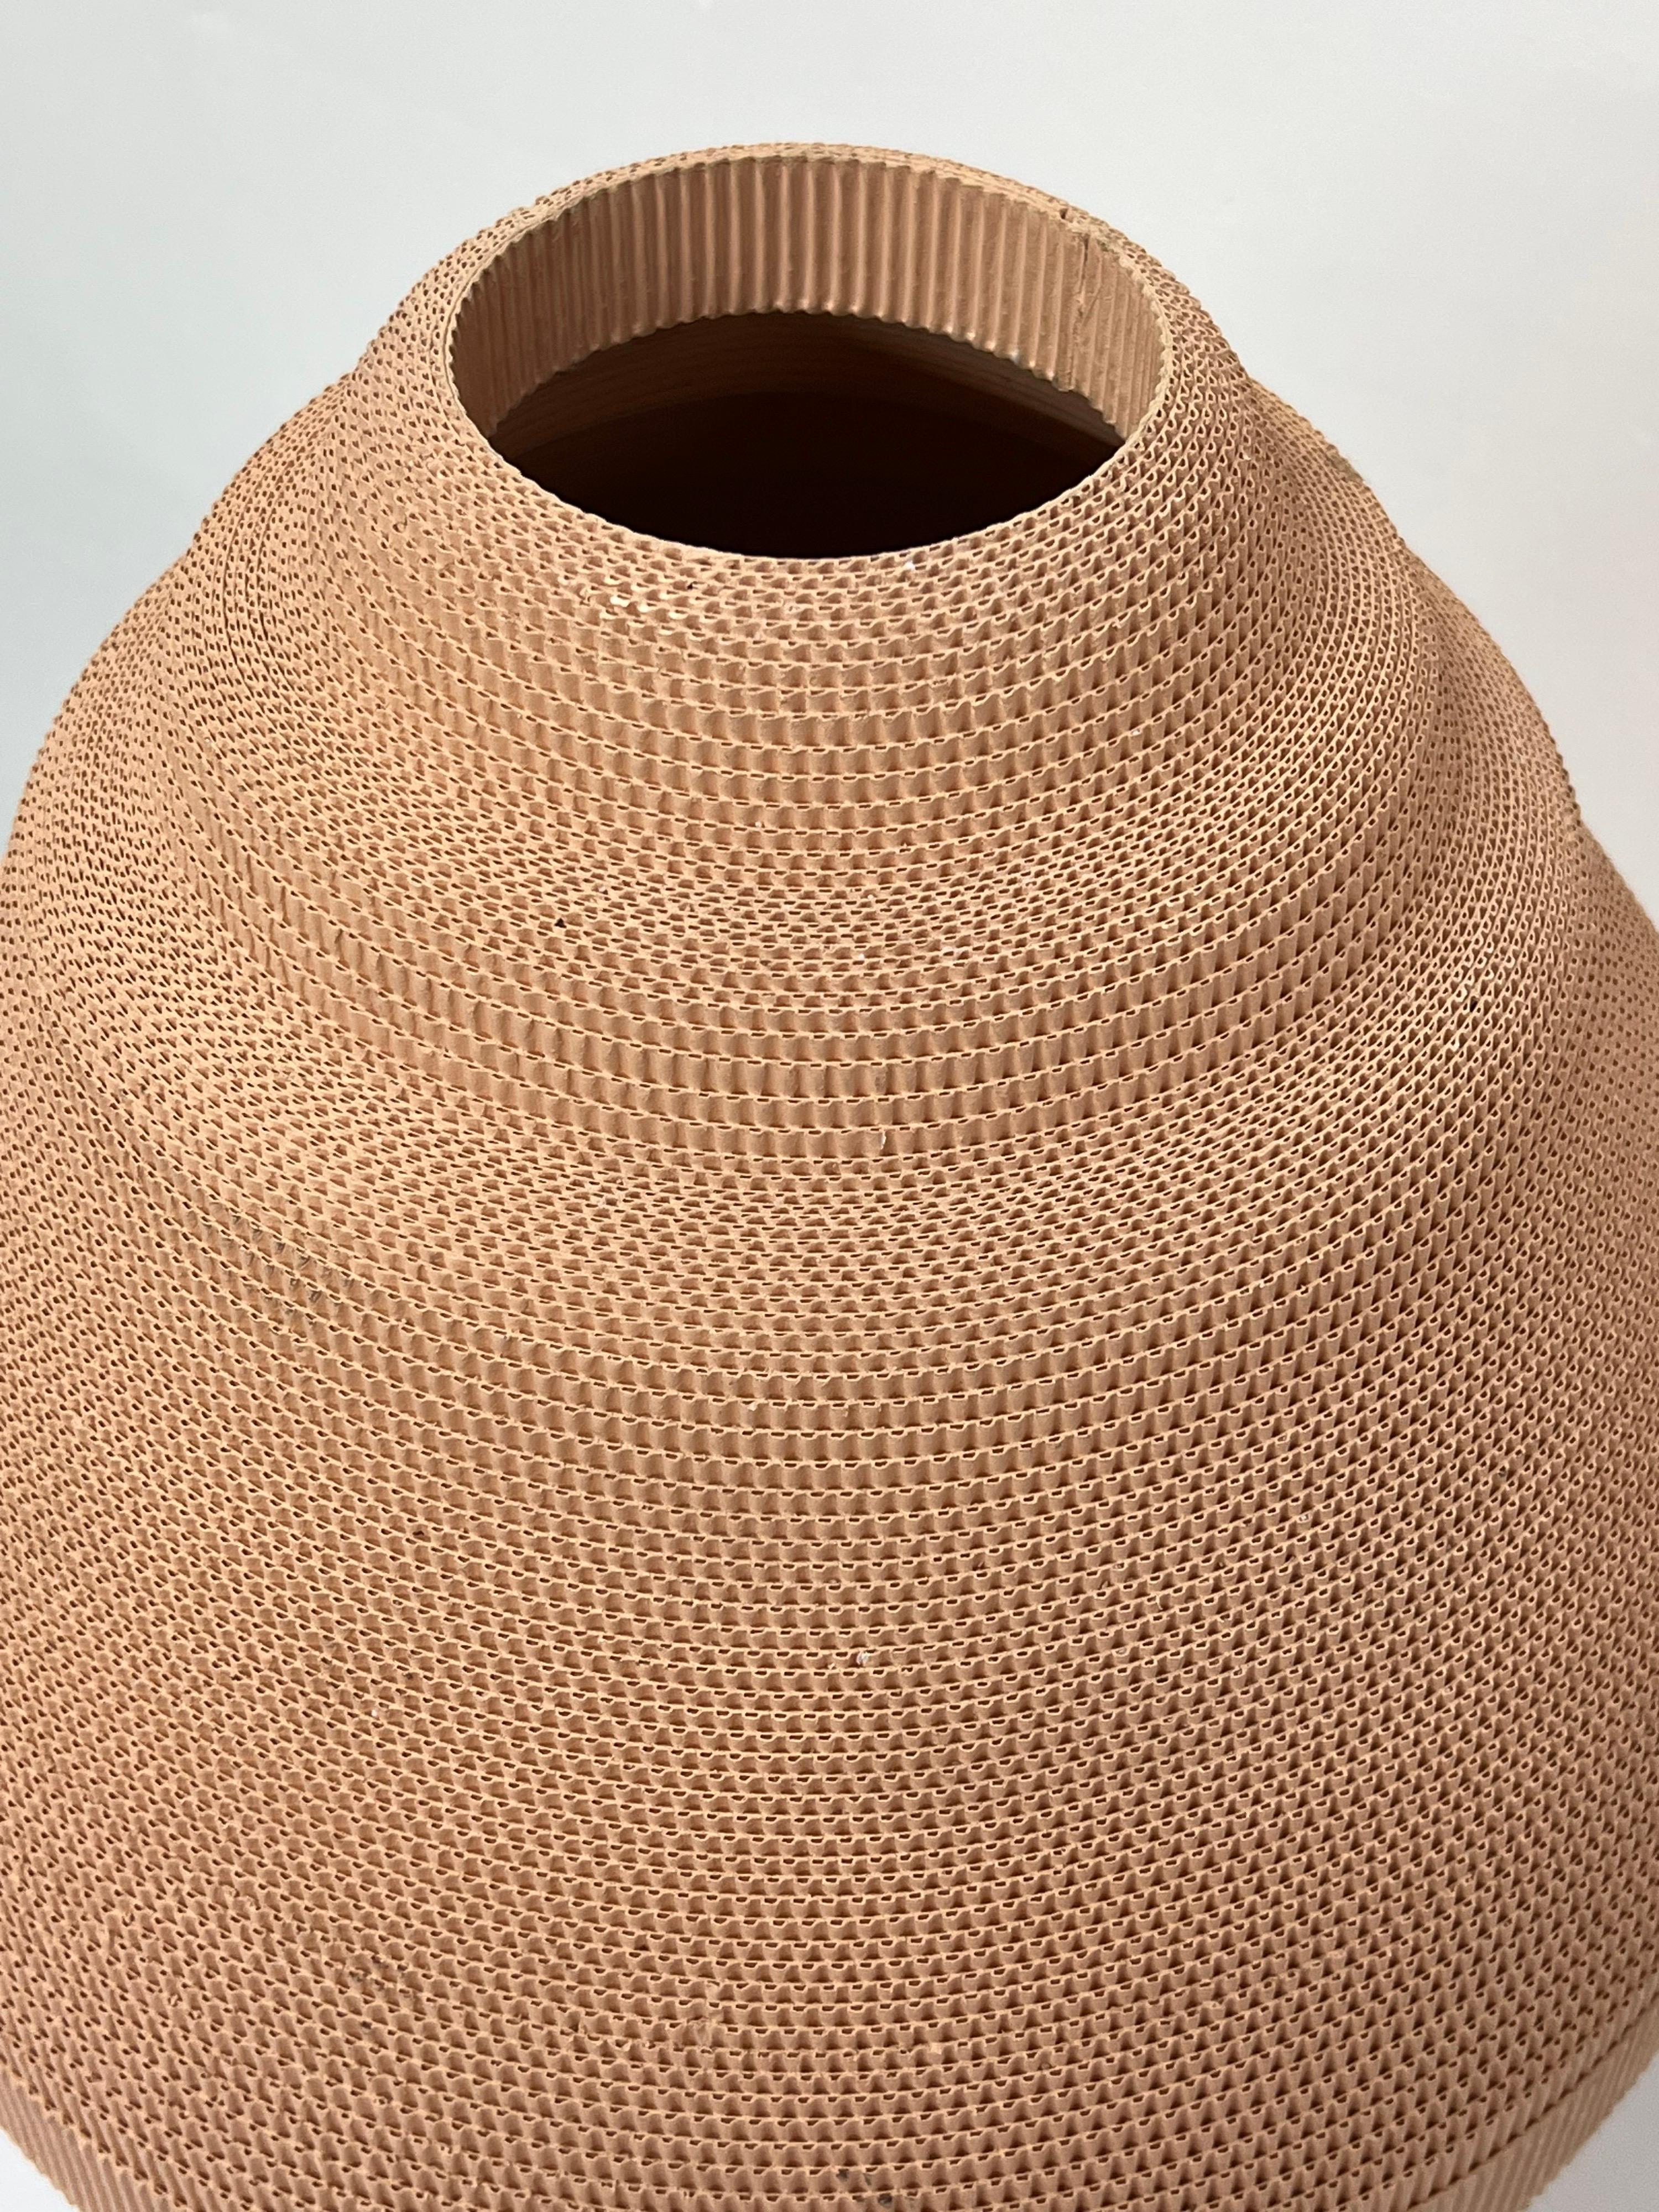 Postmodern Light Peach Corrugated Cardboard Vase by Flute, Chicago In Good Condition For Sale In Miami, FL